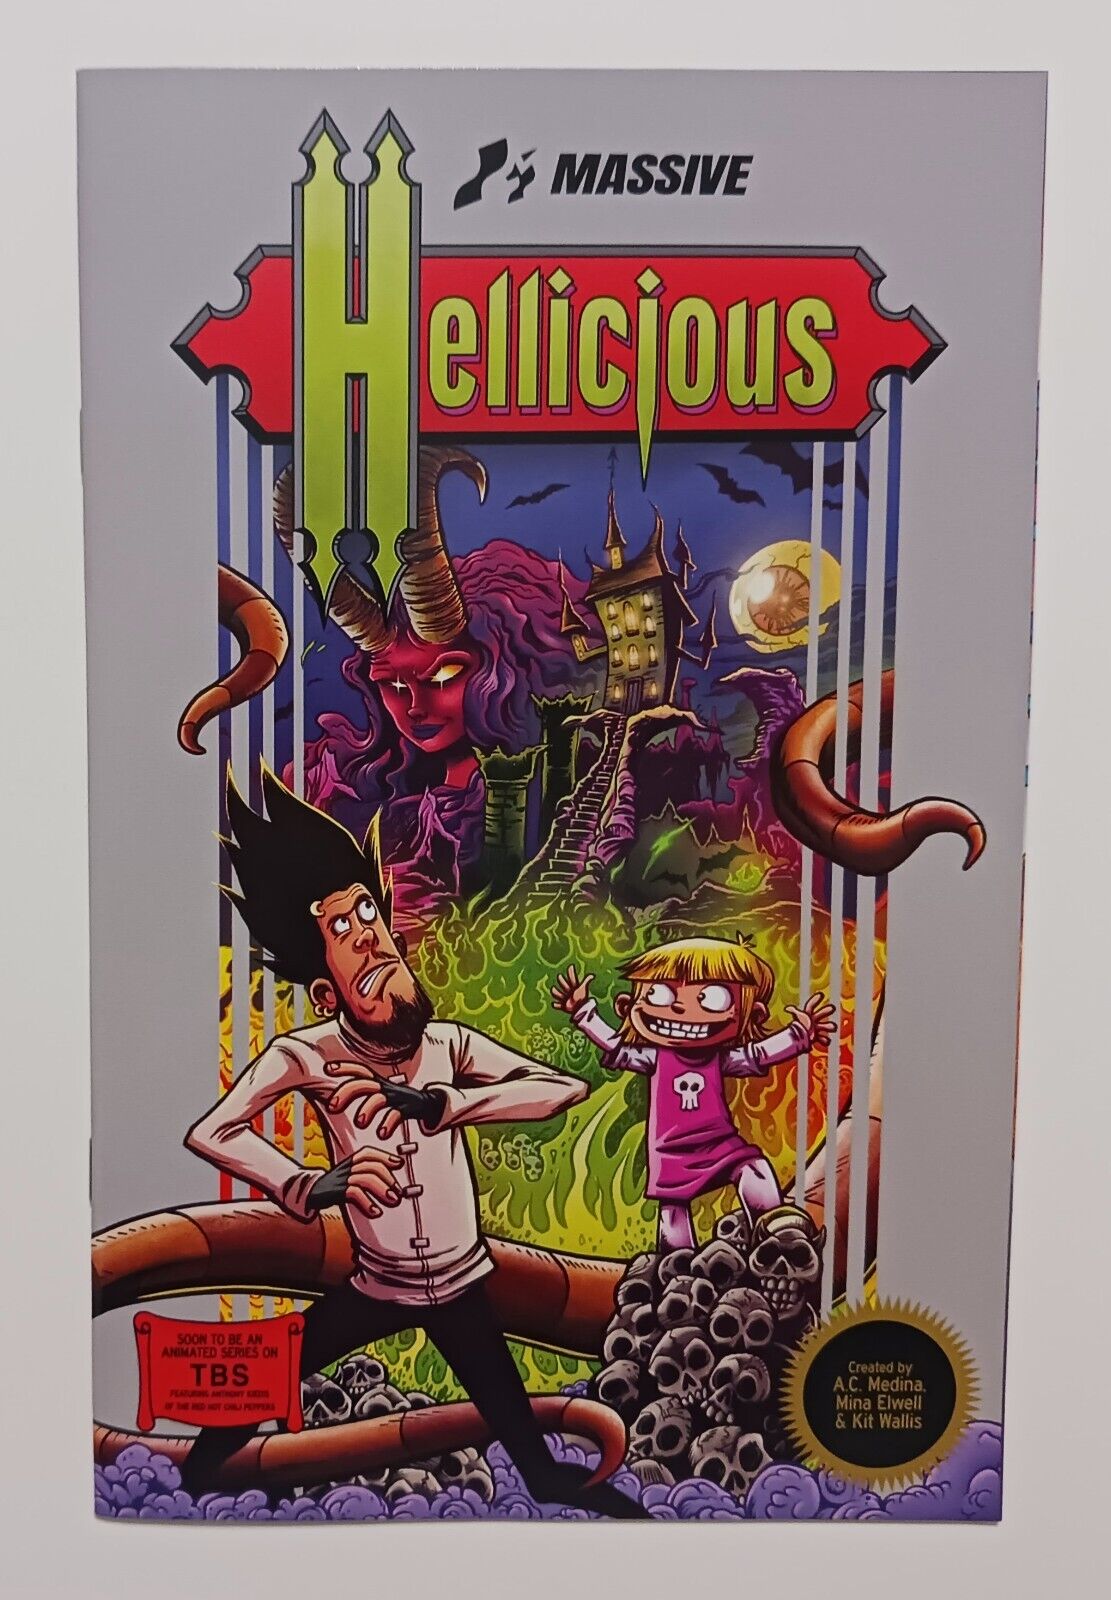 HELLICIOUS #1 COMIC CASTLEVANIA NES VIDEO GAME HOMAGE VARIANT NEAR MINT